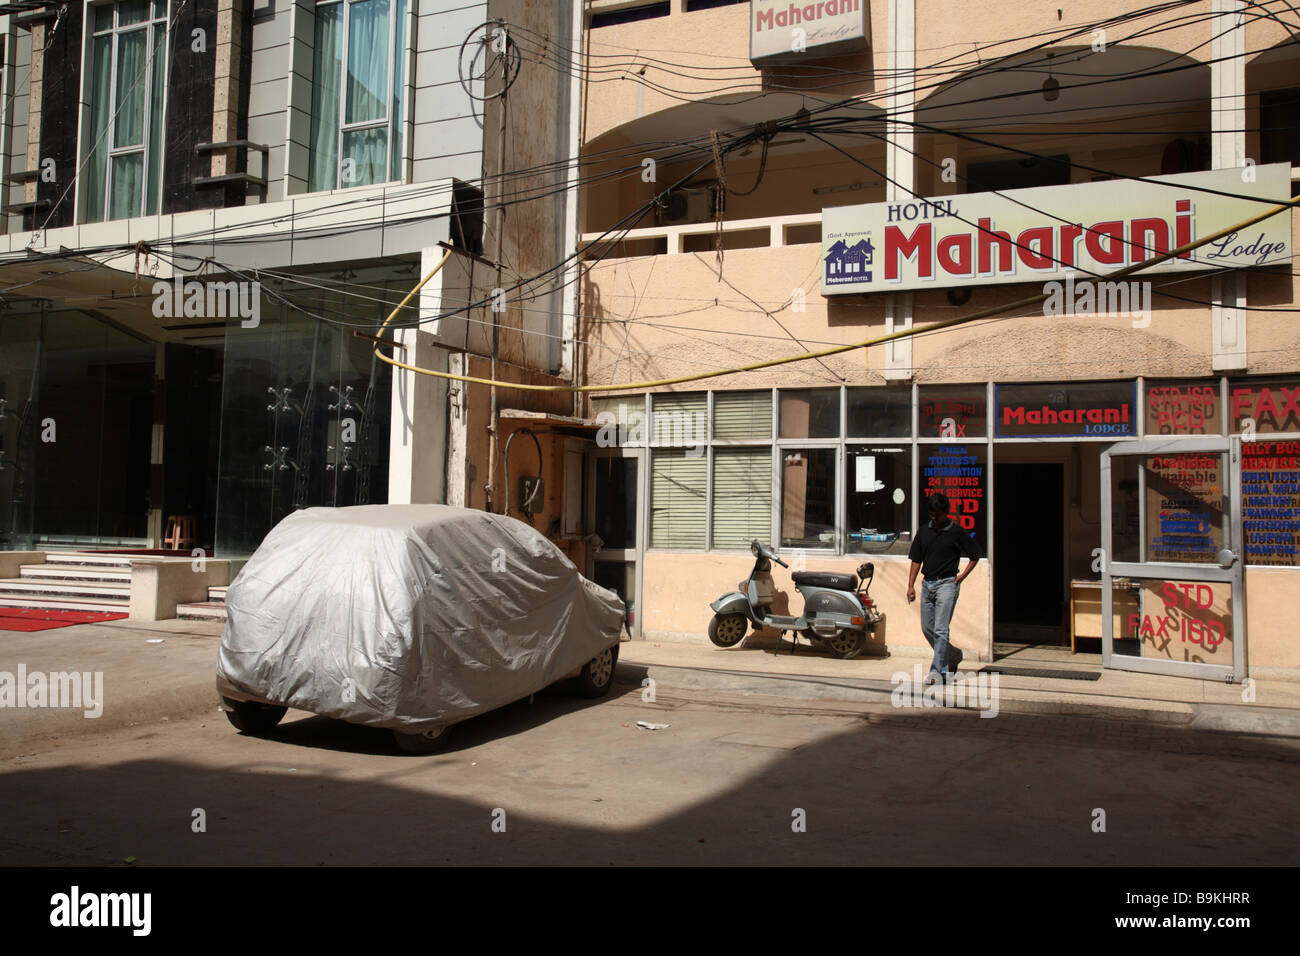 A covered car is protected from the heat in front of Maharani Hotel, Delhi India Stock Photo